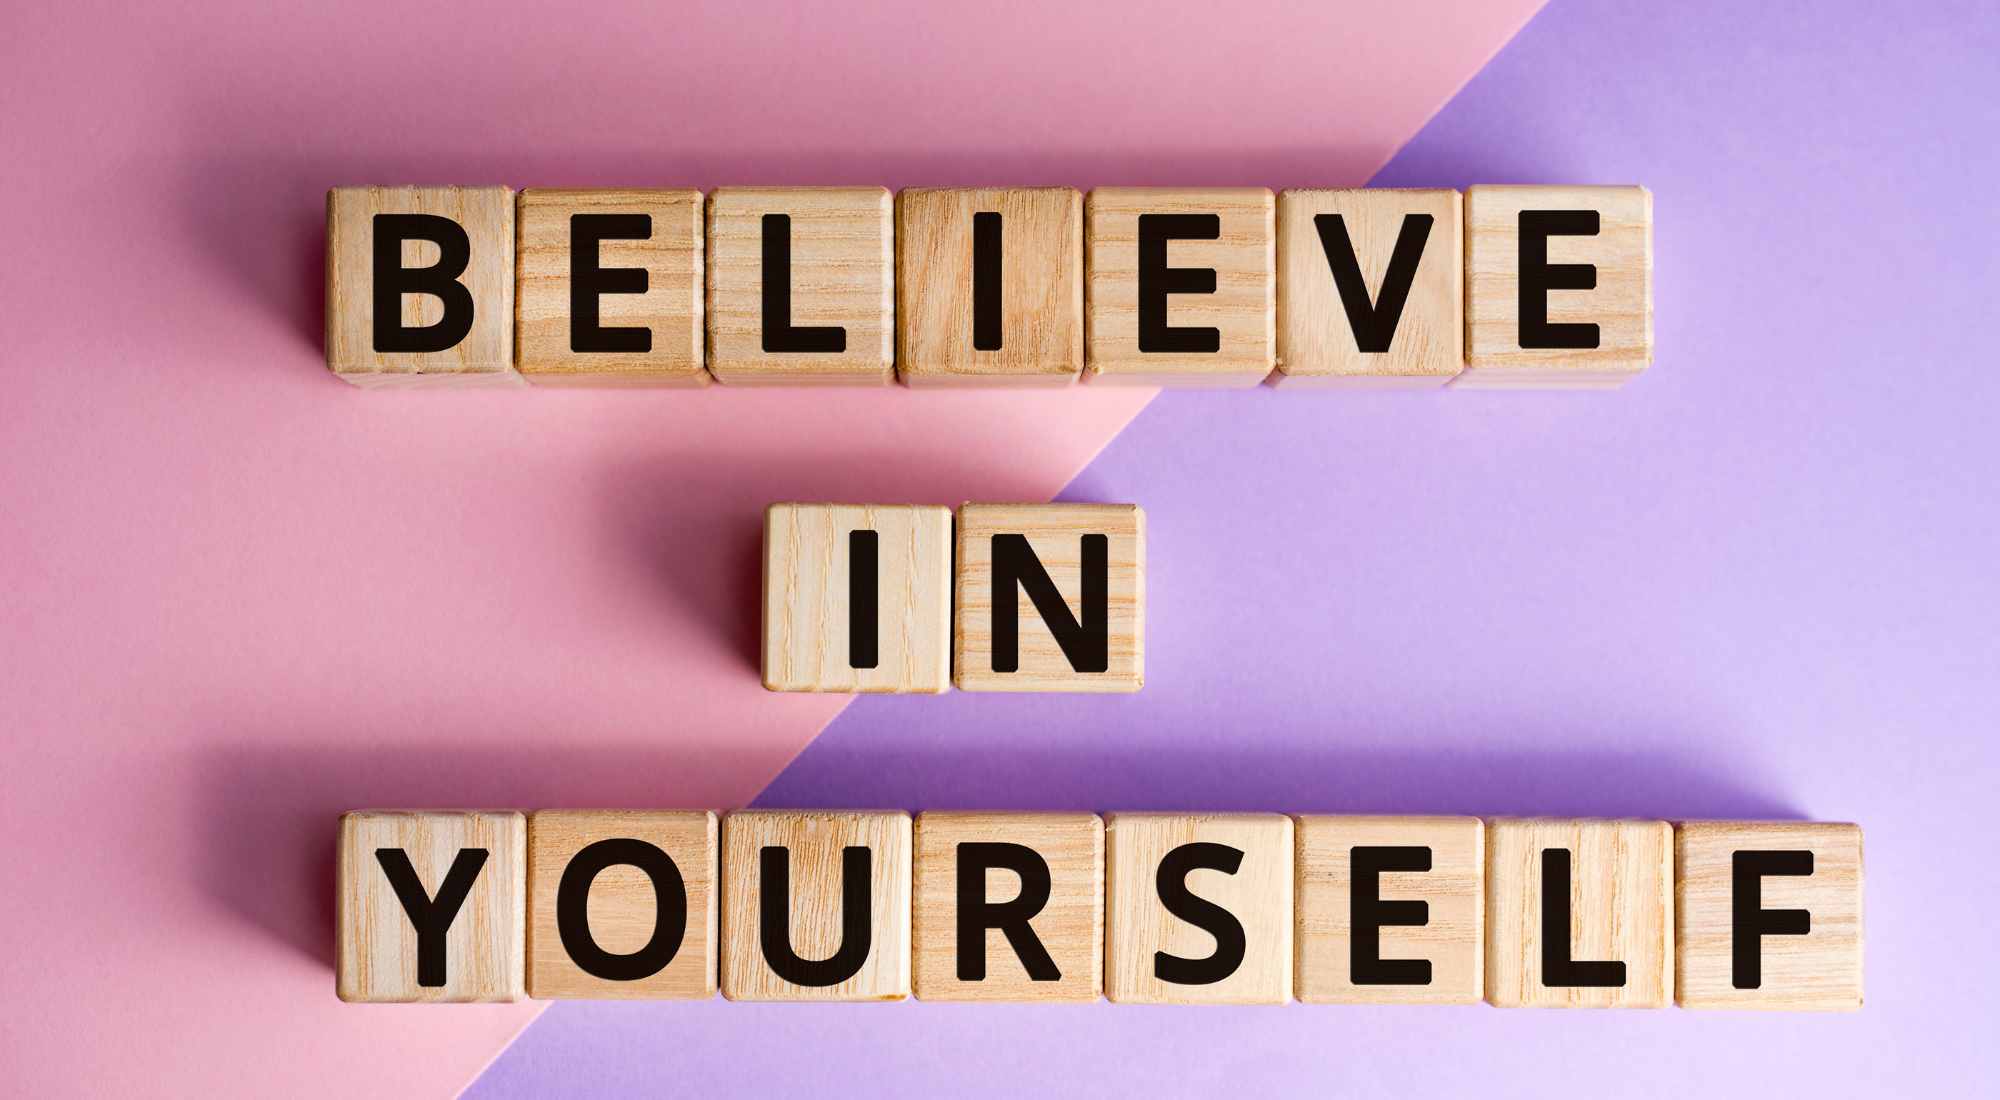 Believe in yourself, persist, and take inspired action to learn how to achieve your dreams.